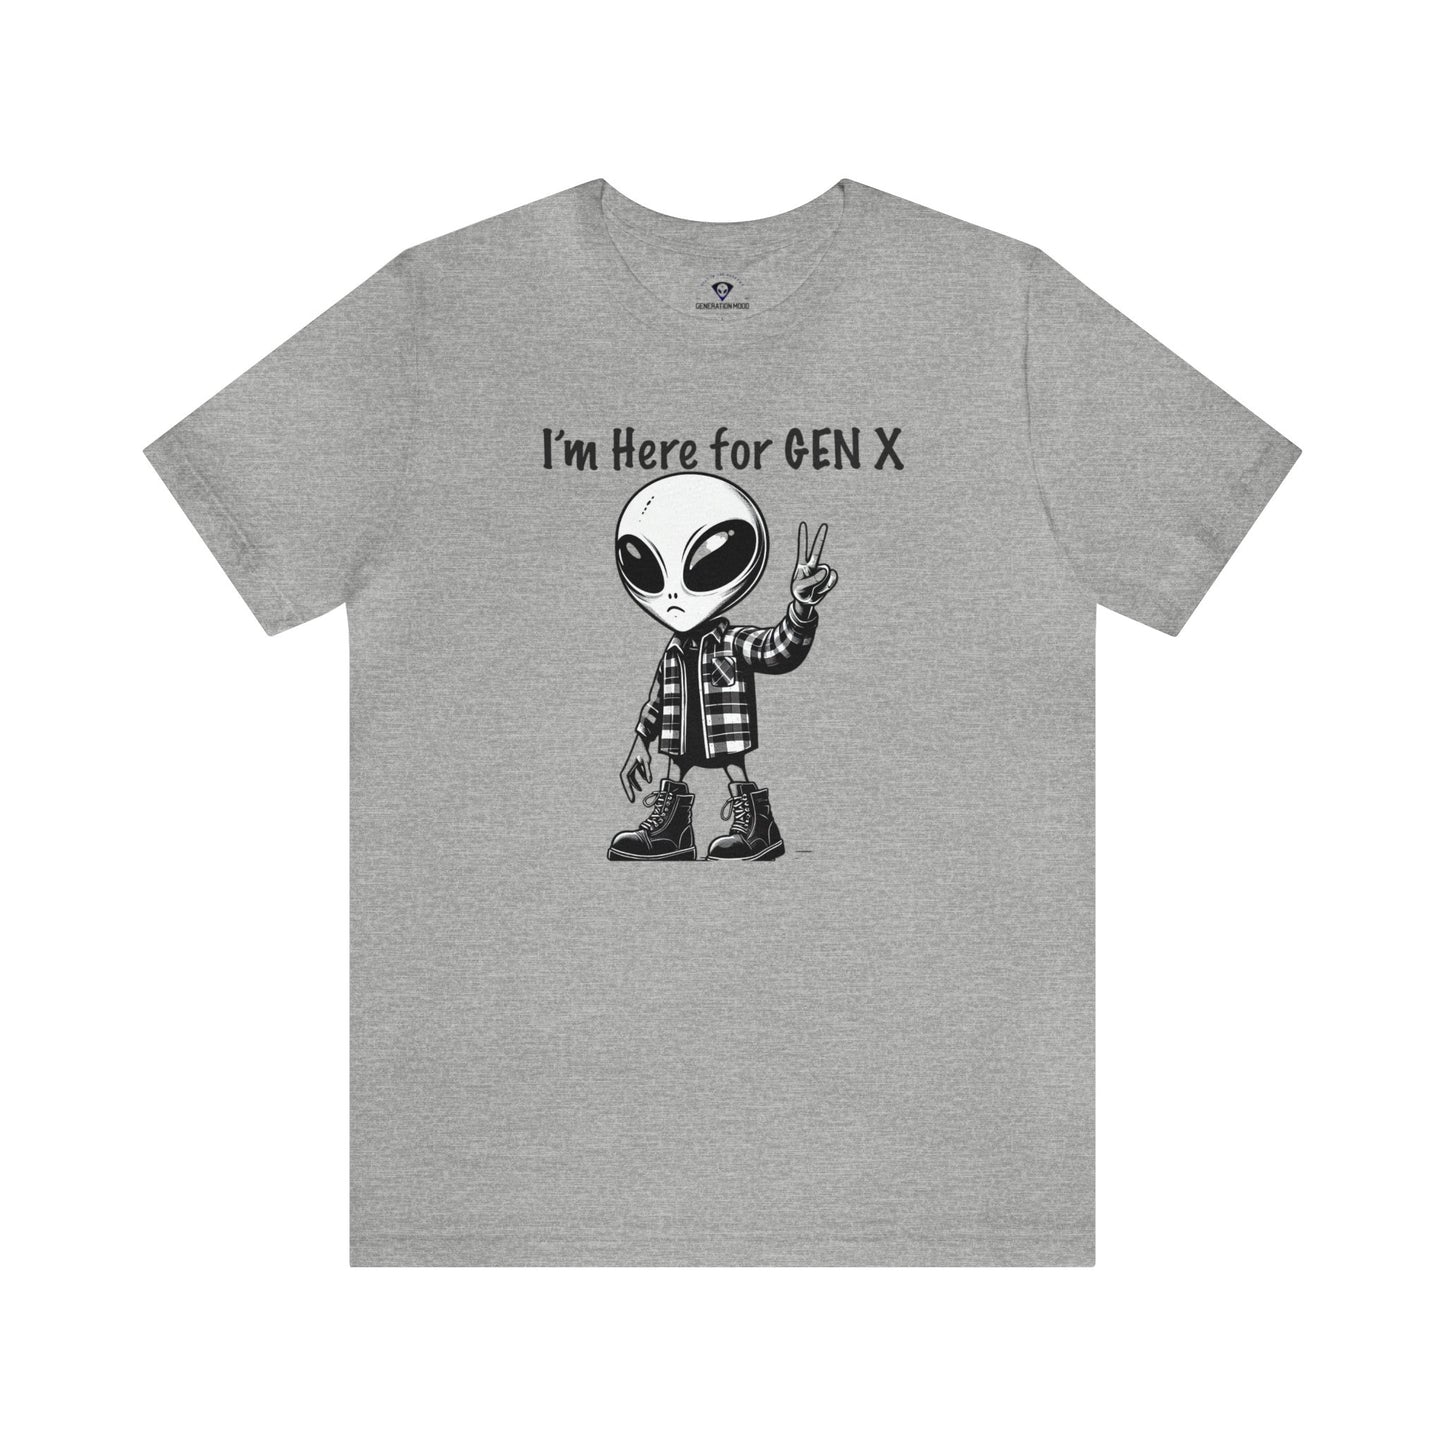 Grey~ Are you a proud member of Generation X, the generation that grew up with minimal adult supervision? Do you identify with the grunge music scene, the critical thinking attitude, and the enterprising spirit of your peers? If so, you might like this T-shirt that features an alien with combat boots and a flannel shirt, flashing a peace sign, saying “I’m here for Gen X”.